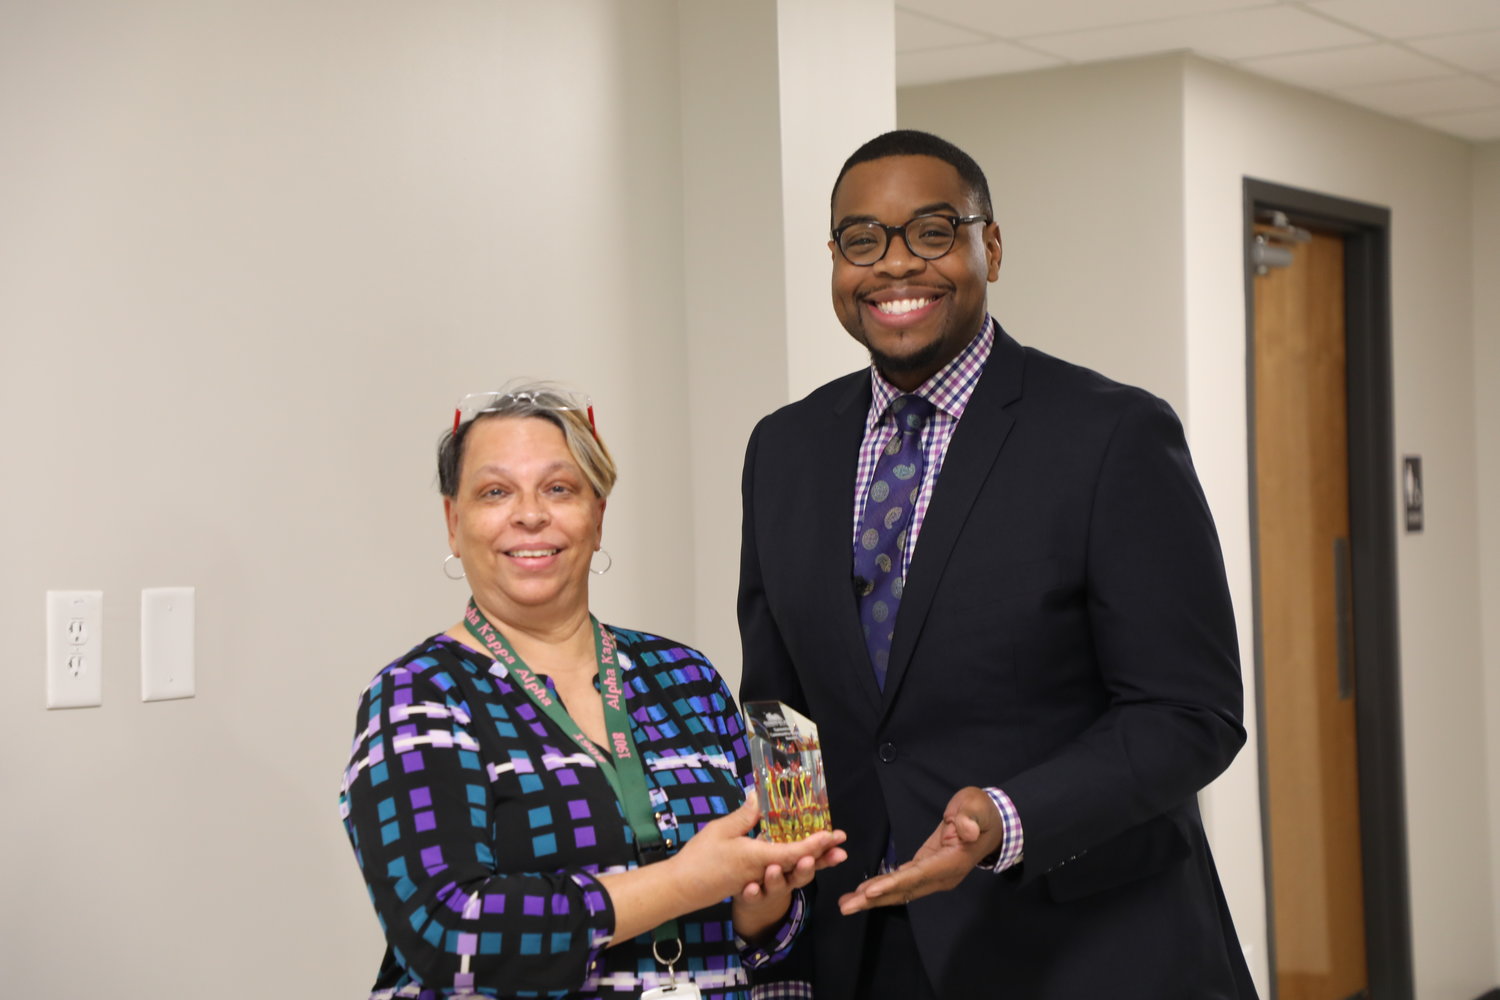 Sharon Glover, the System of Care coordinator for Alliance Health, received the April 2022 Committed Community Support Award. She is pictured with Lindsay Whitley, the associate superintendent of Communications and Community Engagement.